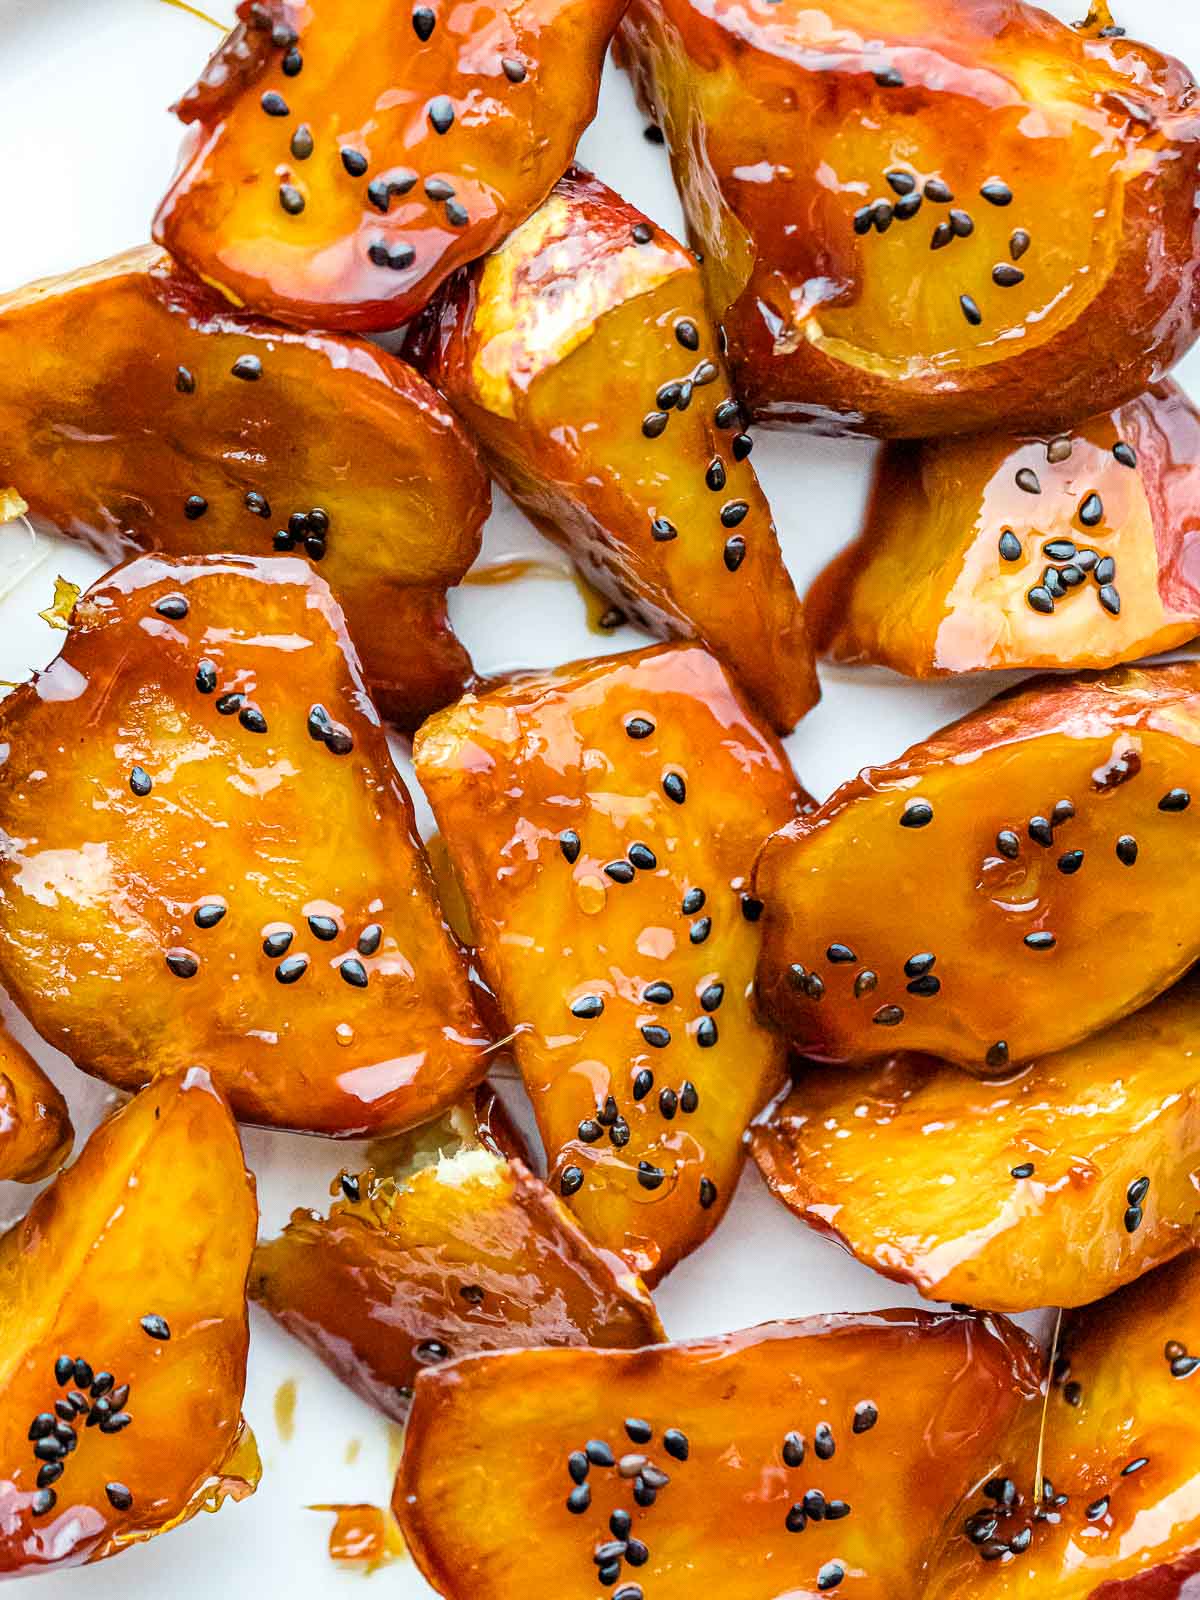 Korean candied sweet potatoes with golden caramel coating and black sesame seeds on a white plate